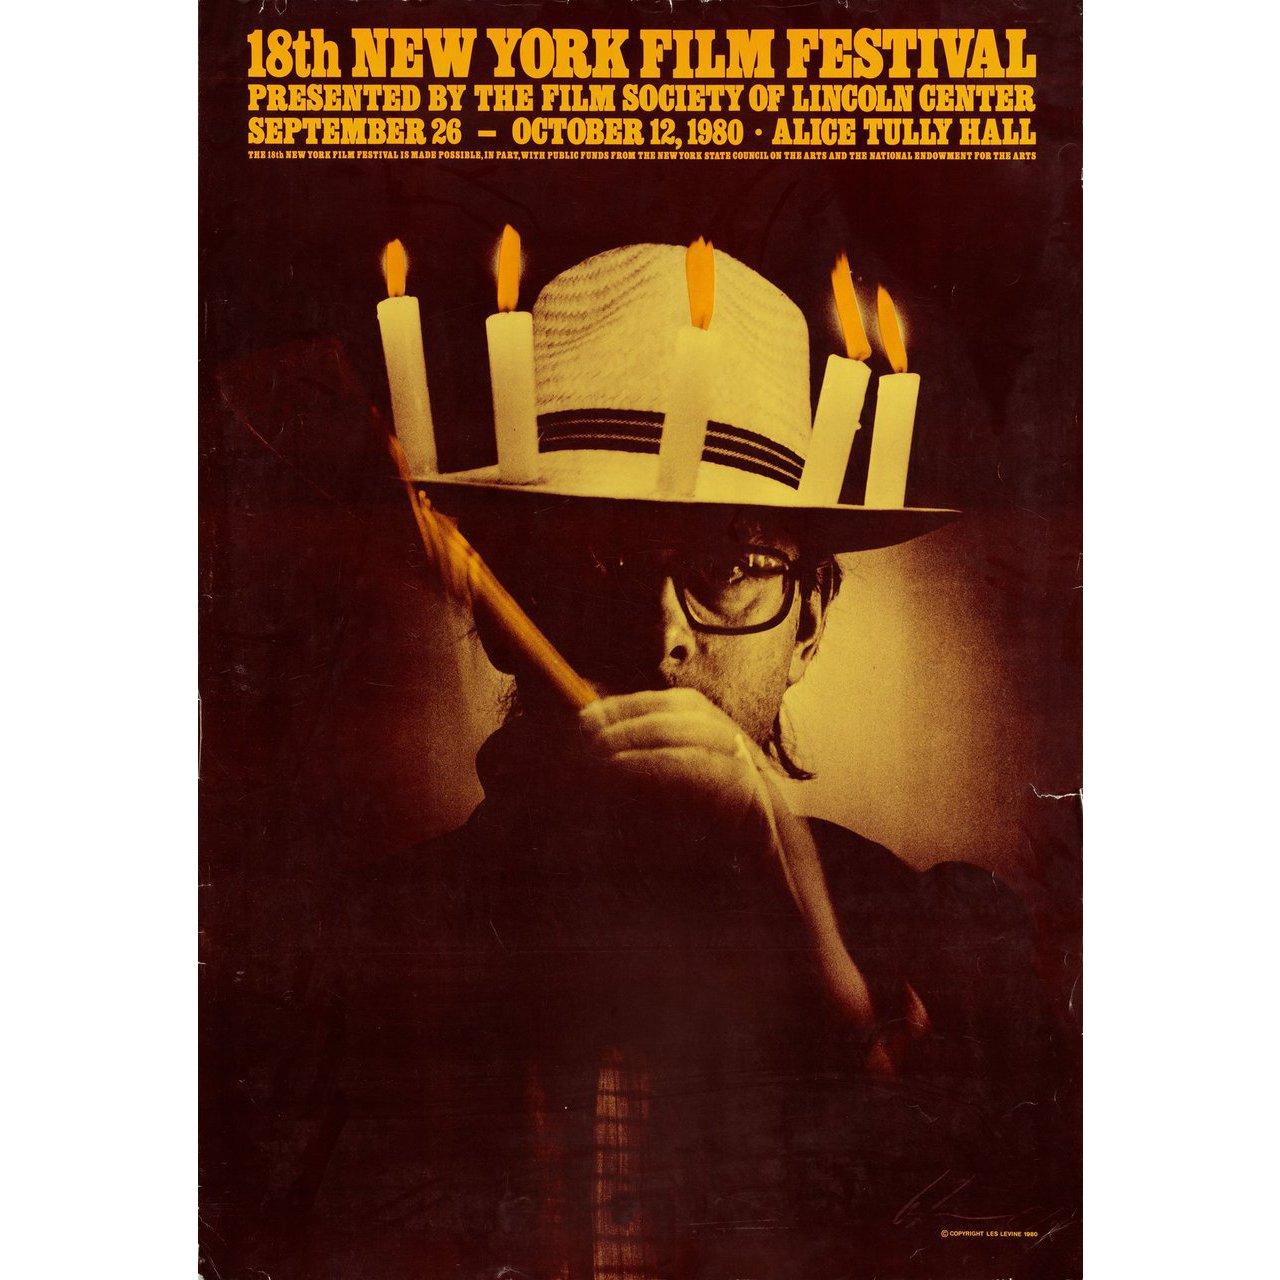 Original 1980 U.S. half subway poster by Les Levine for the 1963 festival New York Film Festival. Signed by Les Levine. Very Good condition, rolled w/ tears. Please note: the size is stated in inches and the actual size can vary by an inch or